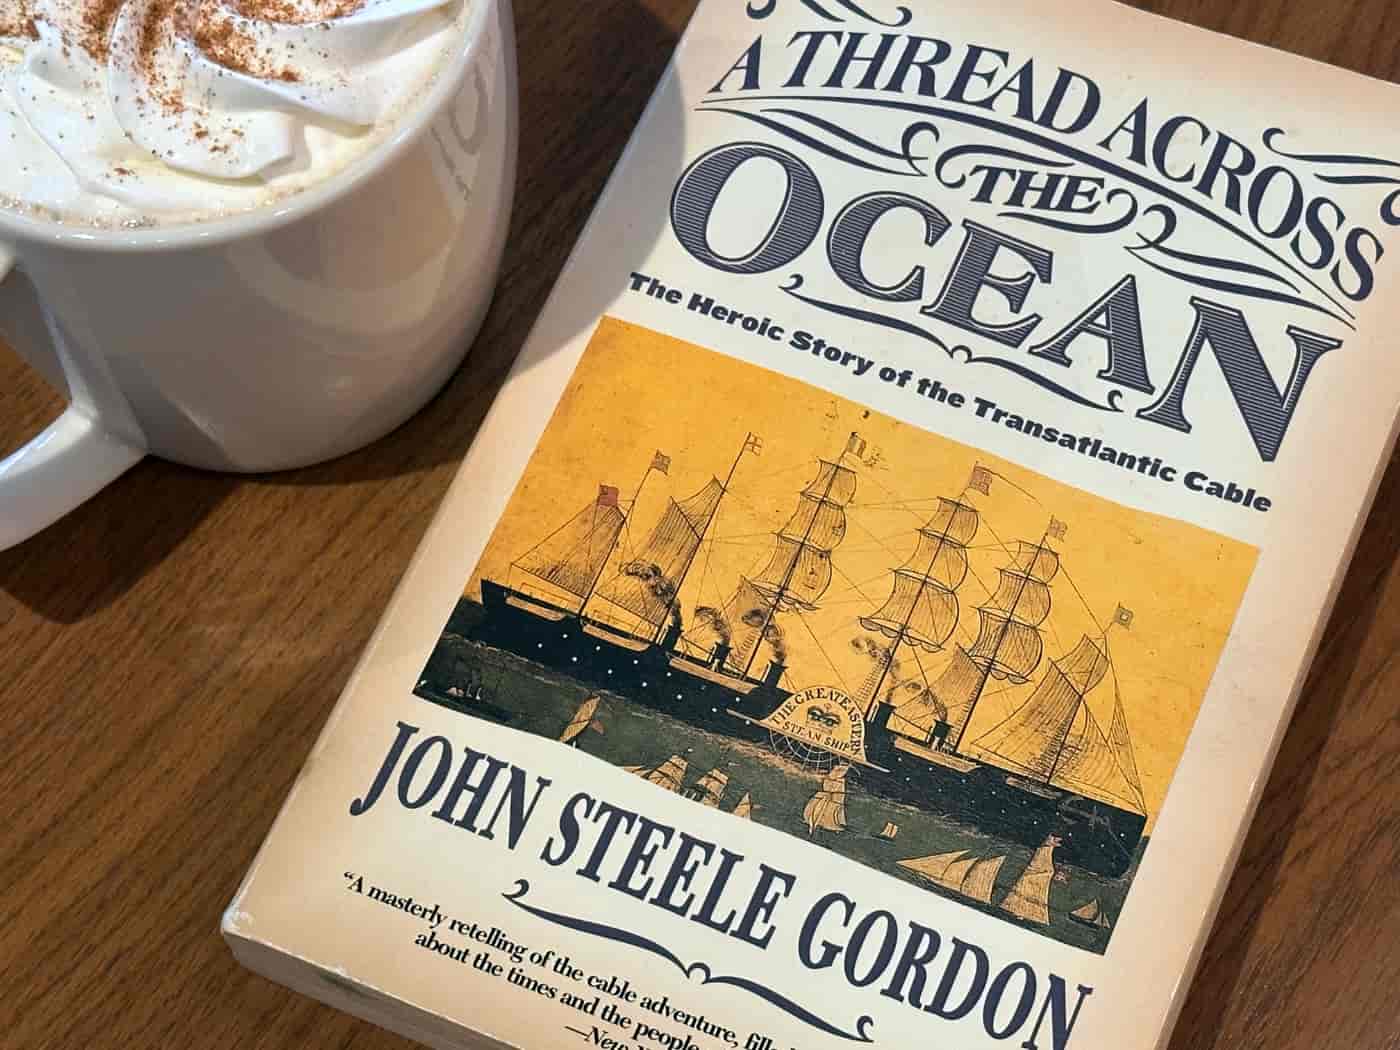 The book 'A Thread Across the Ocean' beside a white mug with whipped cream on a wooden table